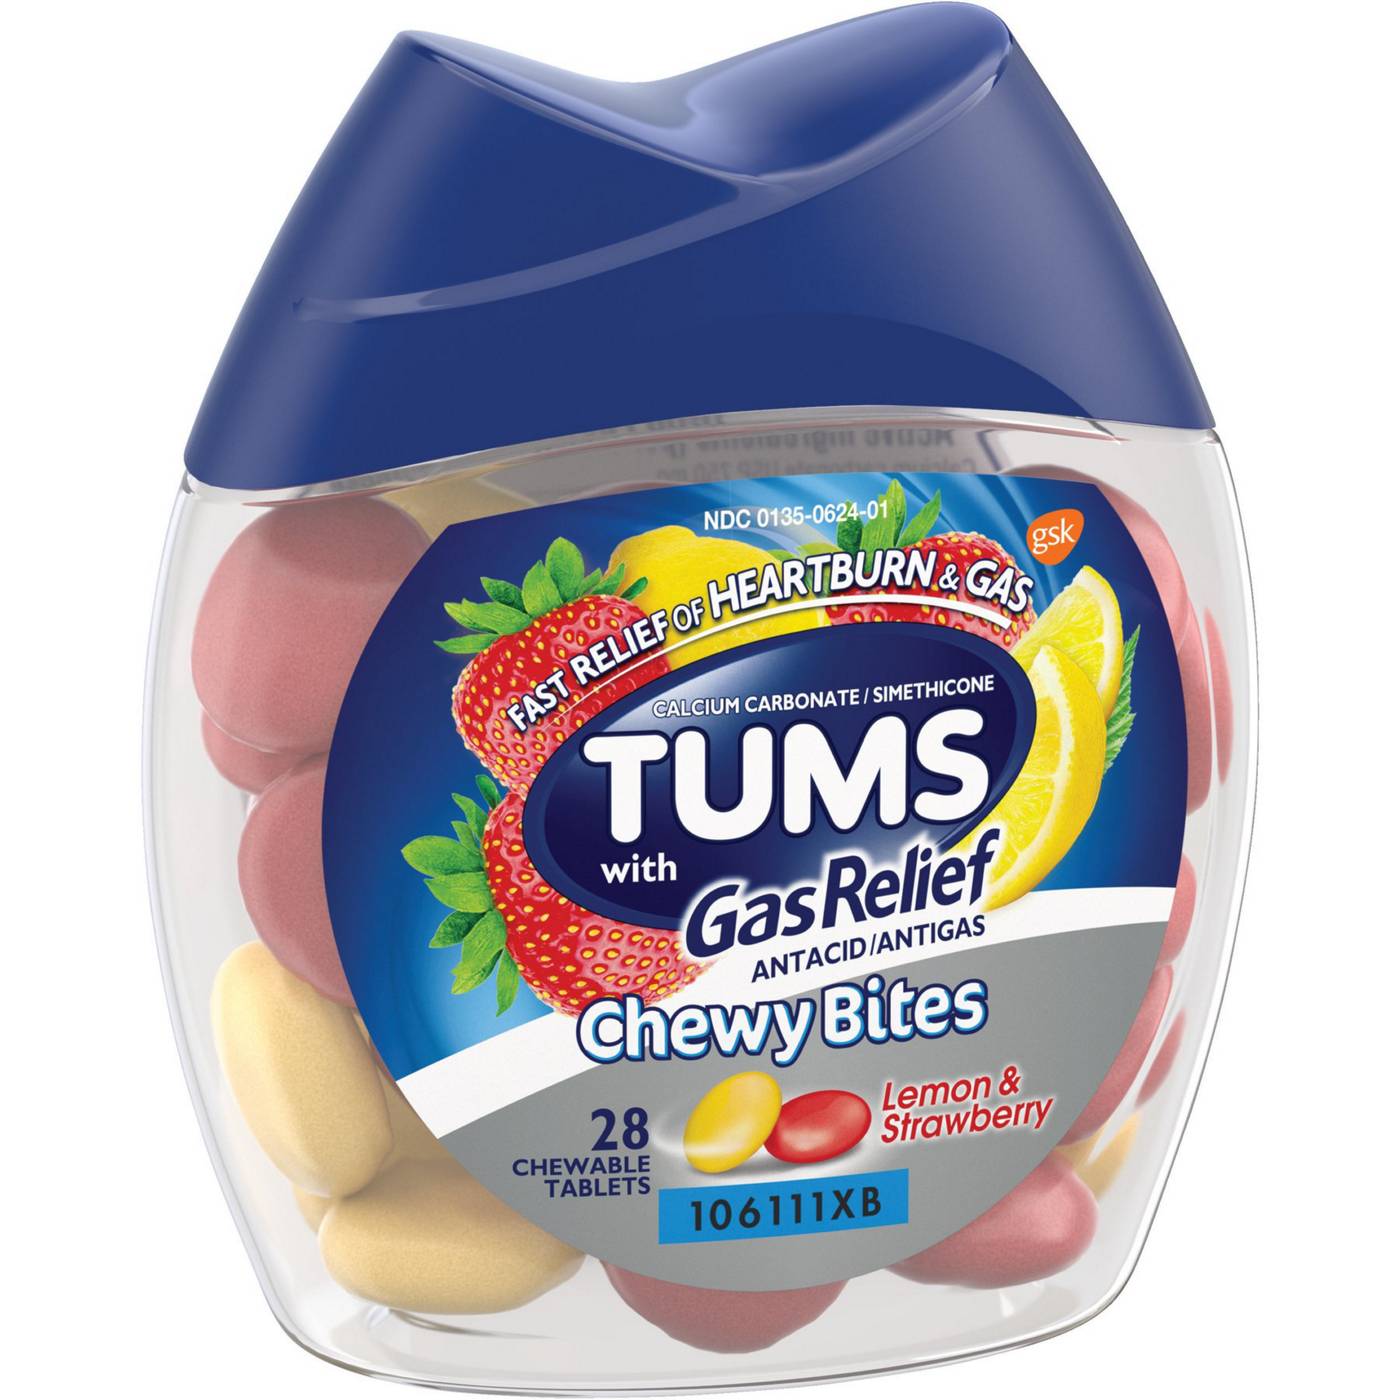 Tums Chewy Bites Lemon and Strawberry Antacid Tablets; image 1 of 8